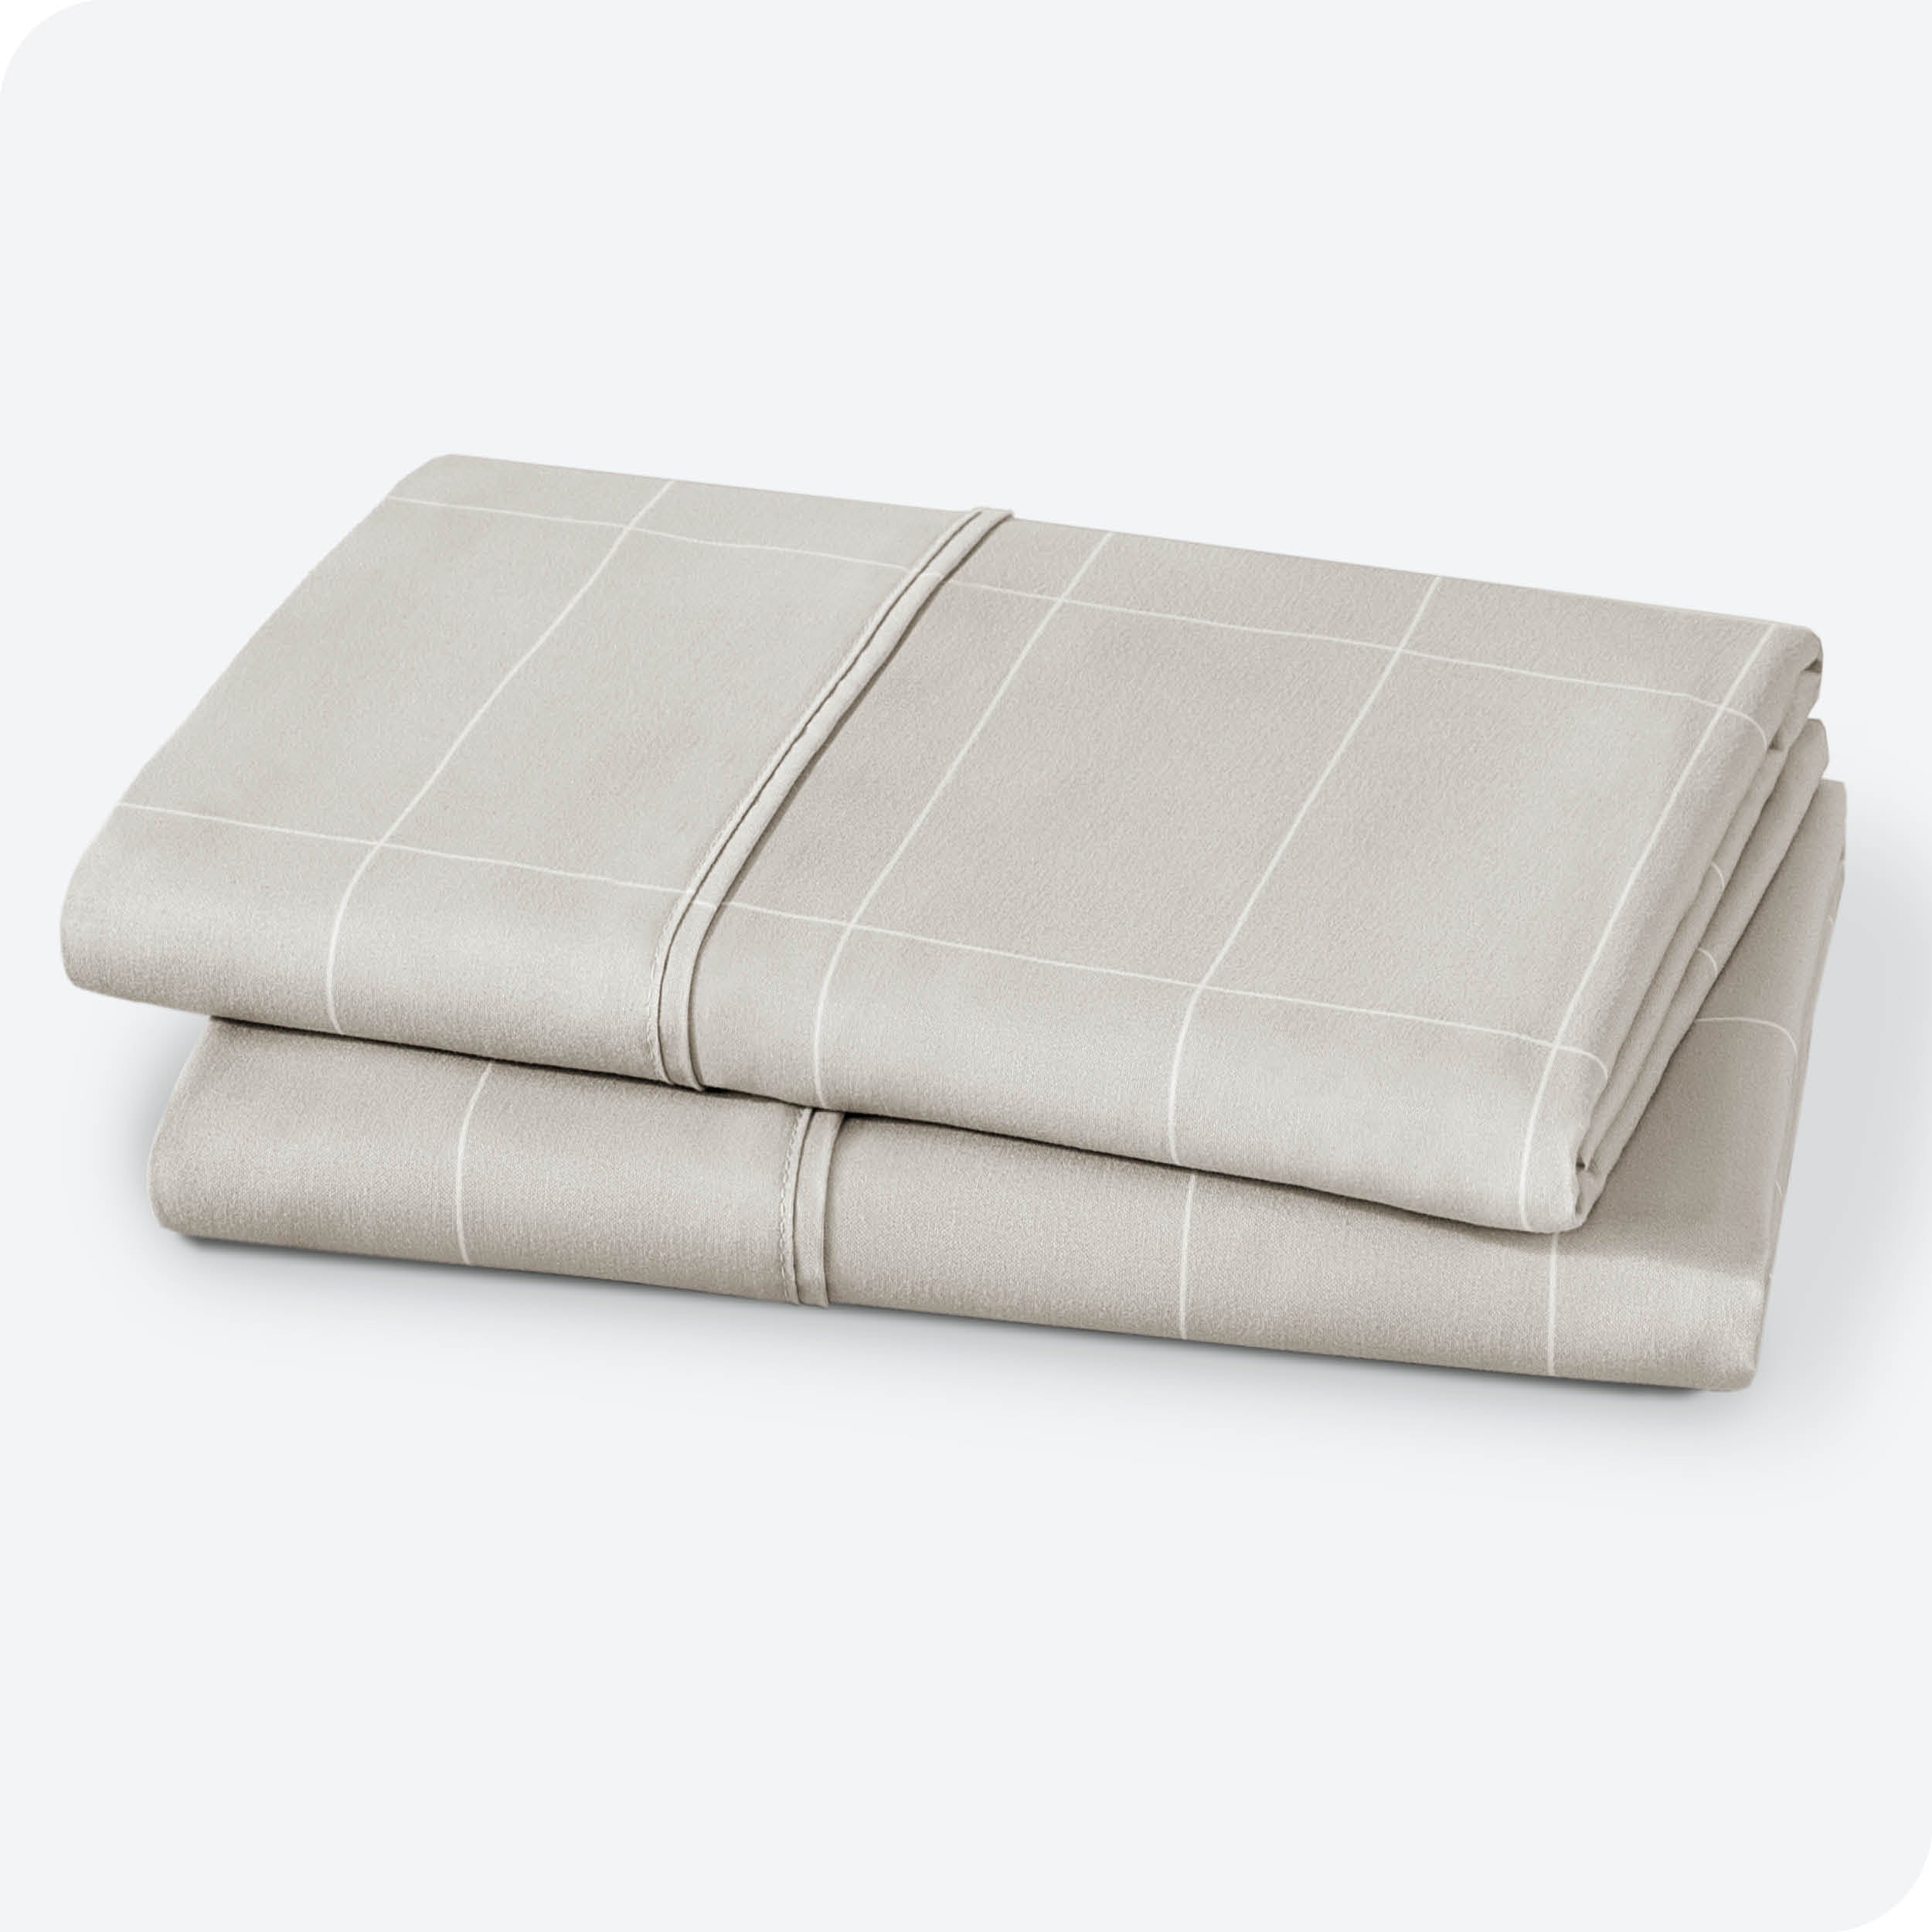 Two pillowcases folded and stacked